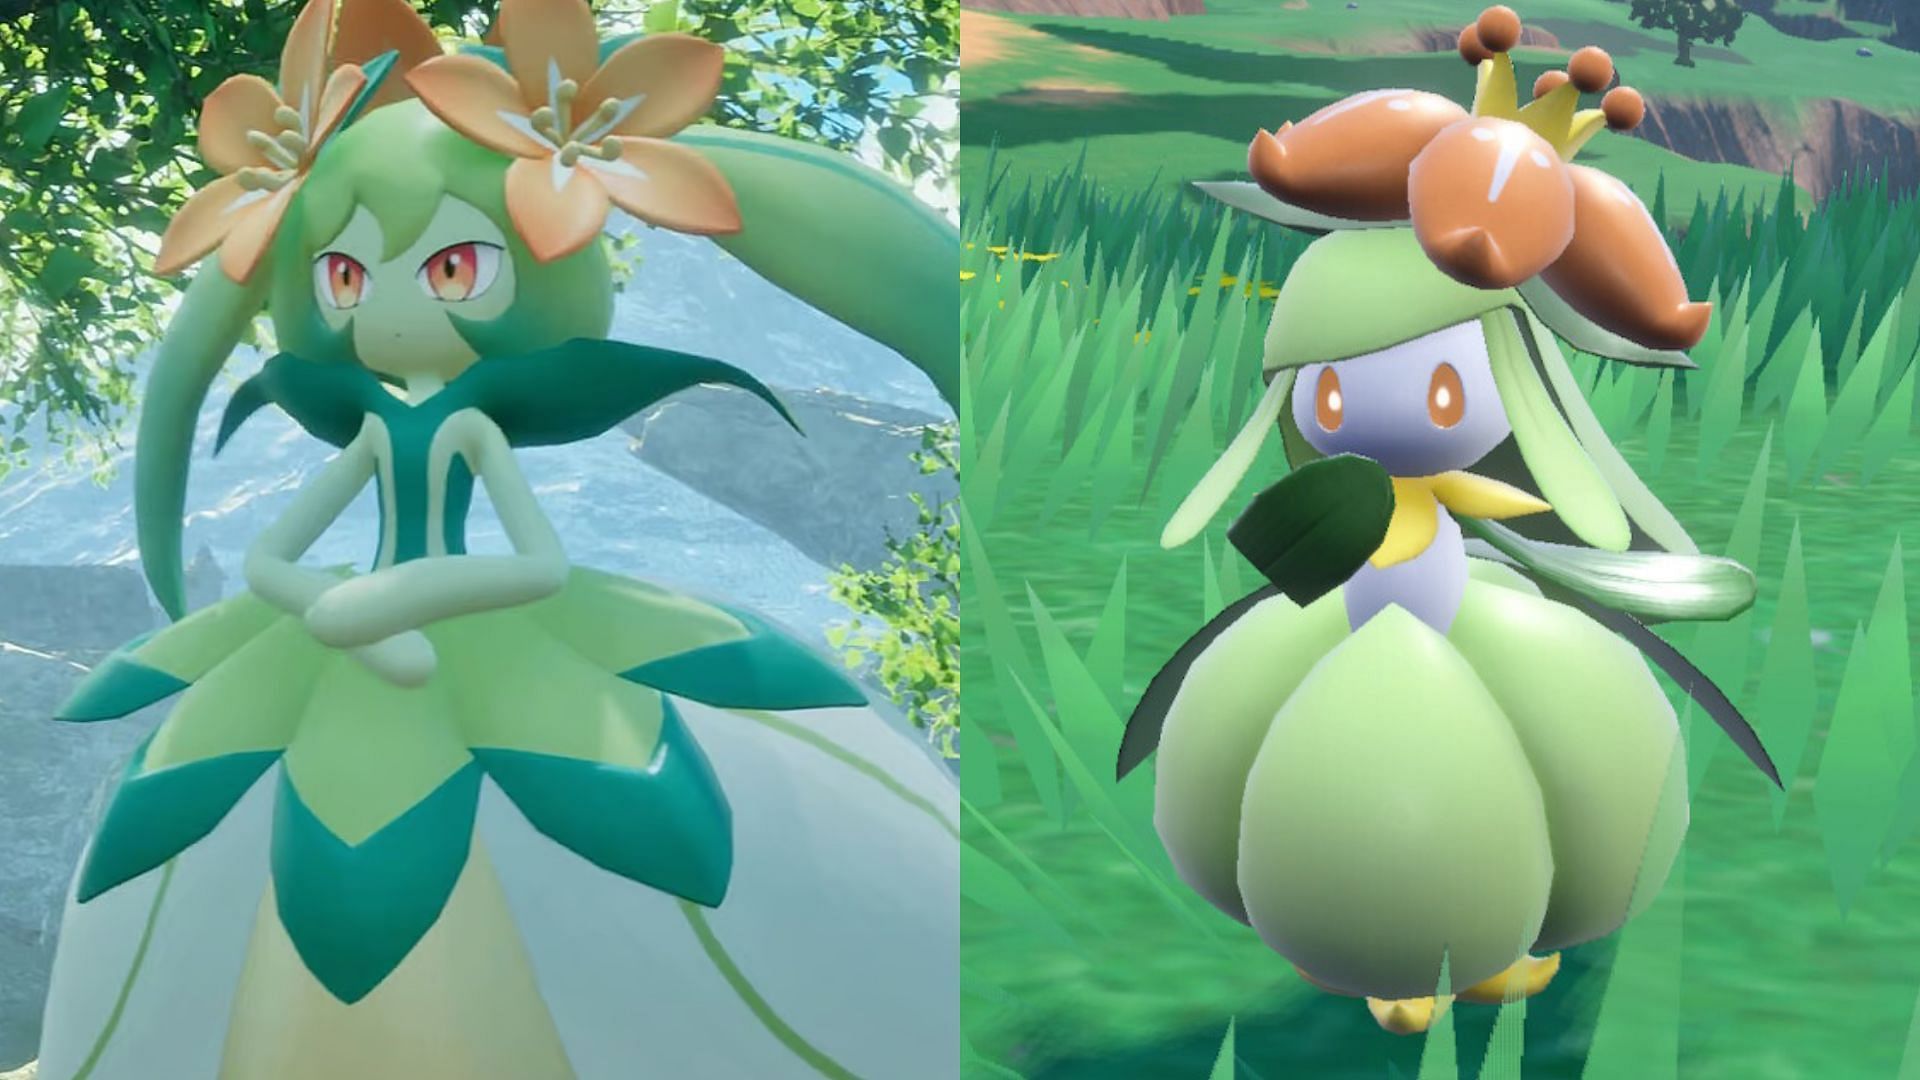 Lyleen's Palworld Pal design resembles Lilligant to a great extent (Image via Pocketpair/The Pokemon Company)'s Palworld Pal design resembles Lilligant to a great extent (Image via Pocketpair/The Pokemon Company)